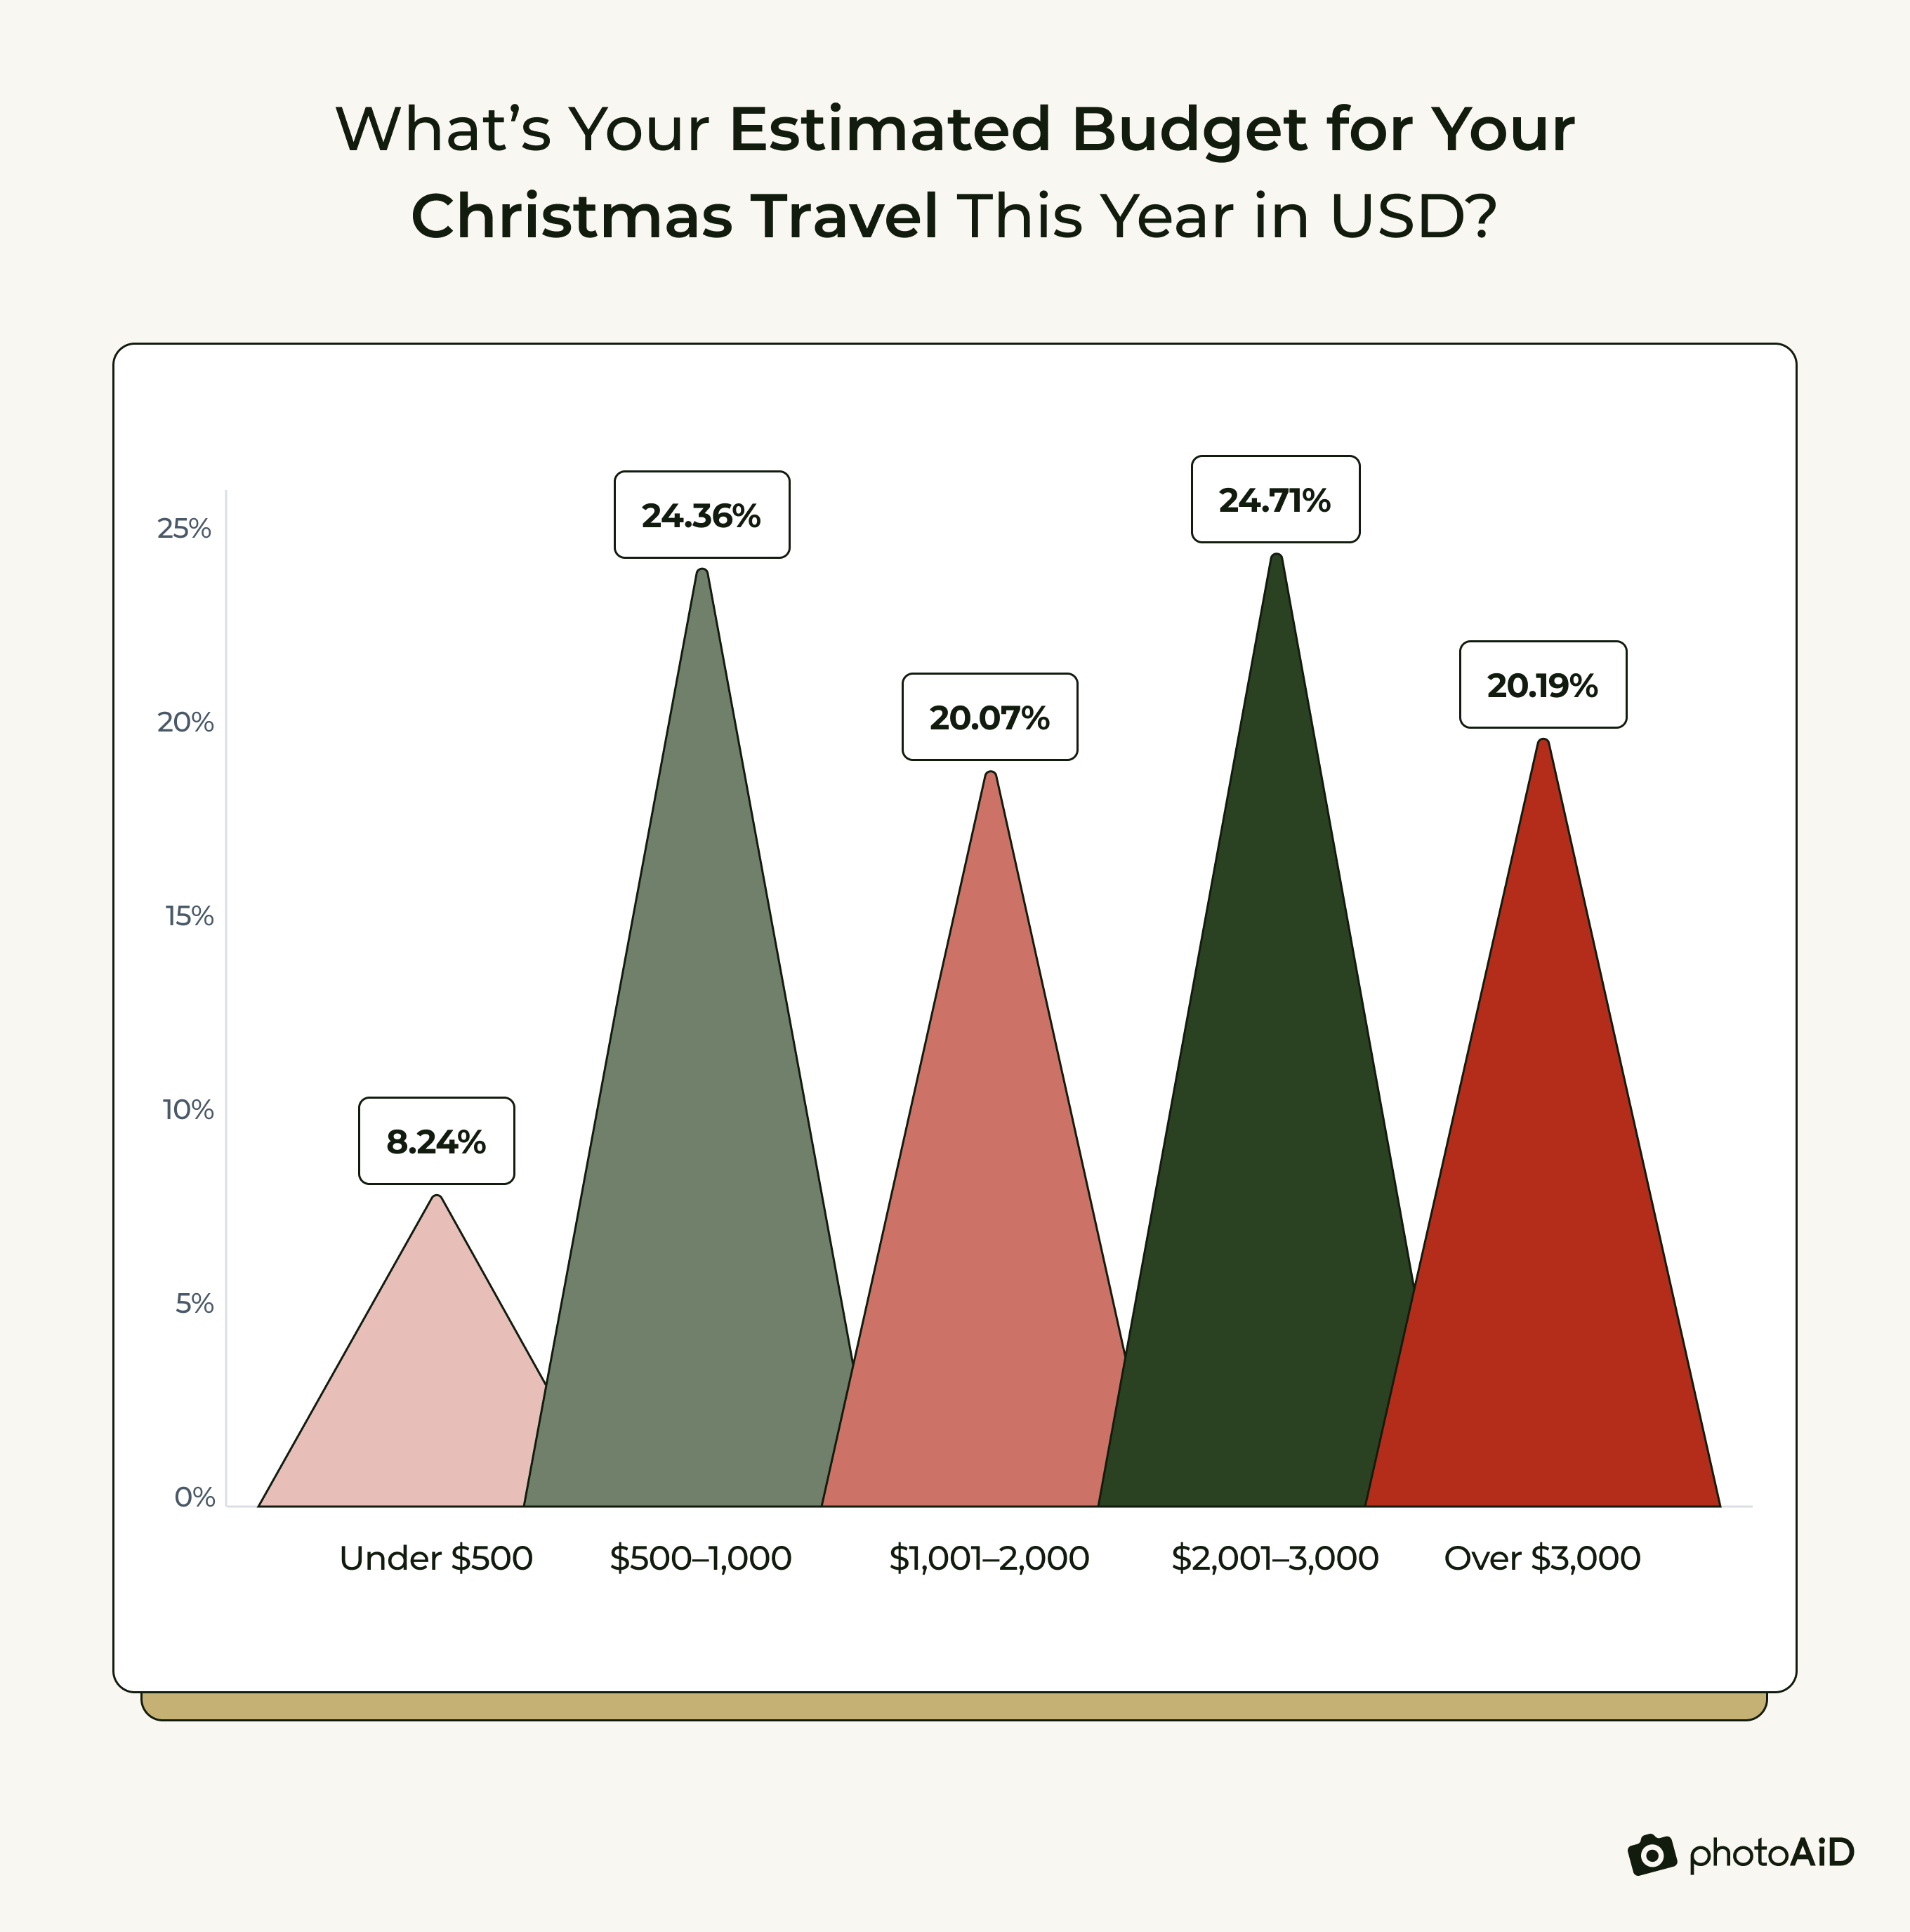 Estimated Christmas travel budgets, with a majority having a budget of $1,001 or more